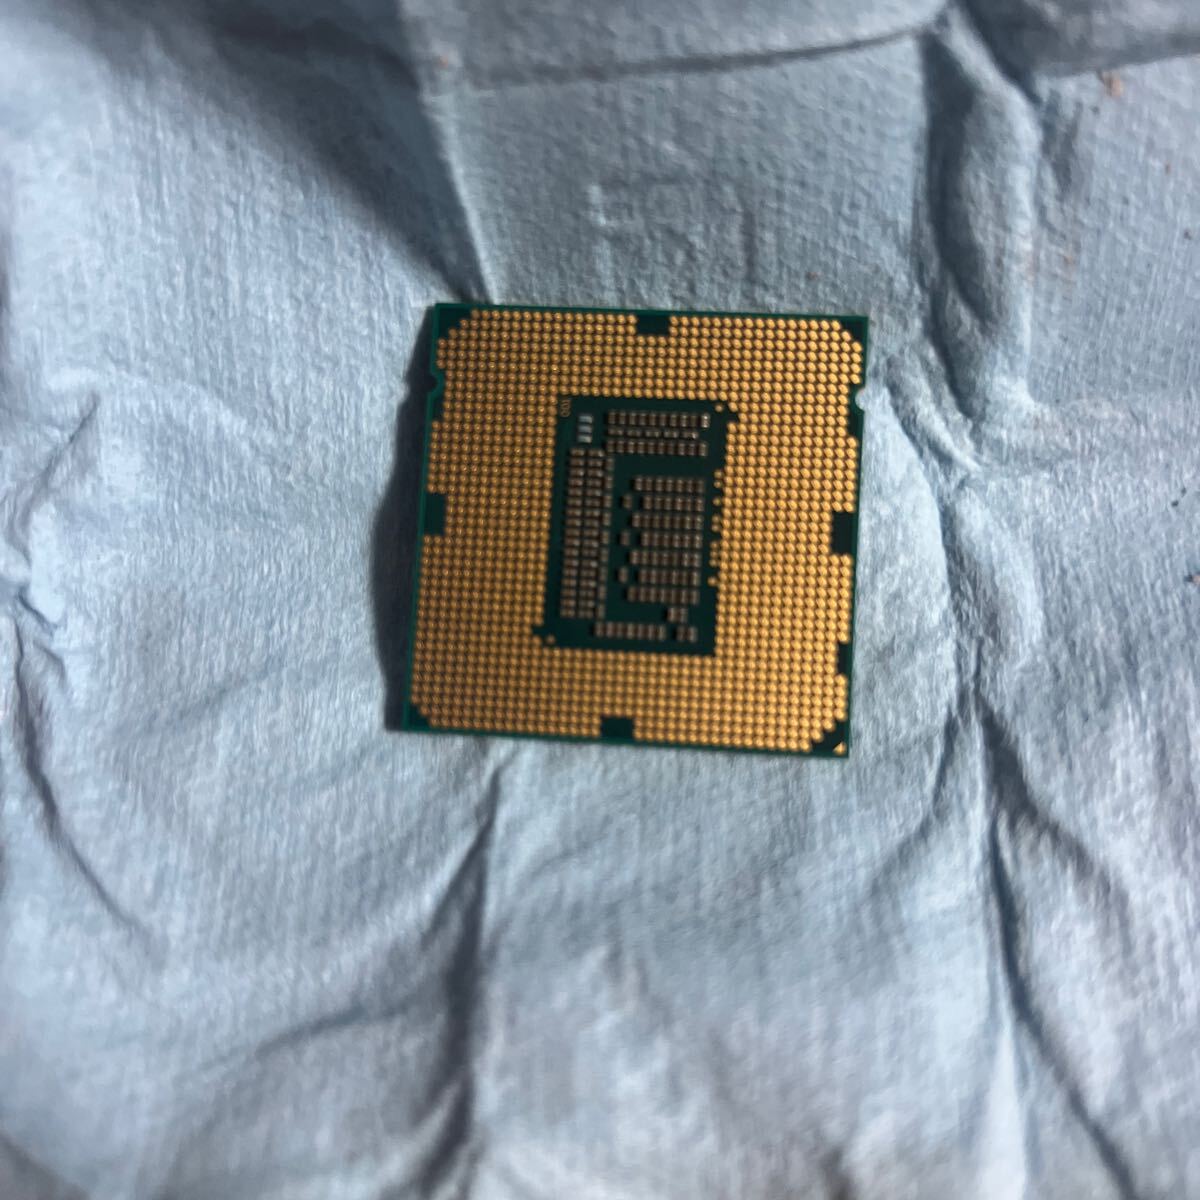 Intel Core CPU i7-3770 3.40ghz chip personal computer PCge-mingPC game Intel used 